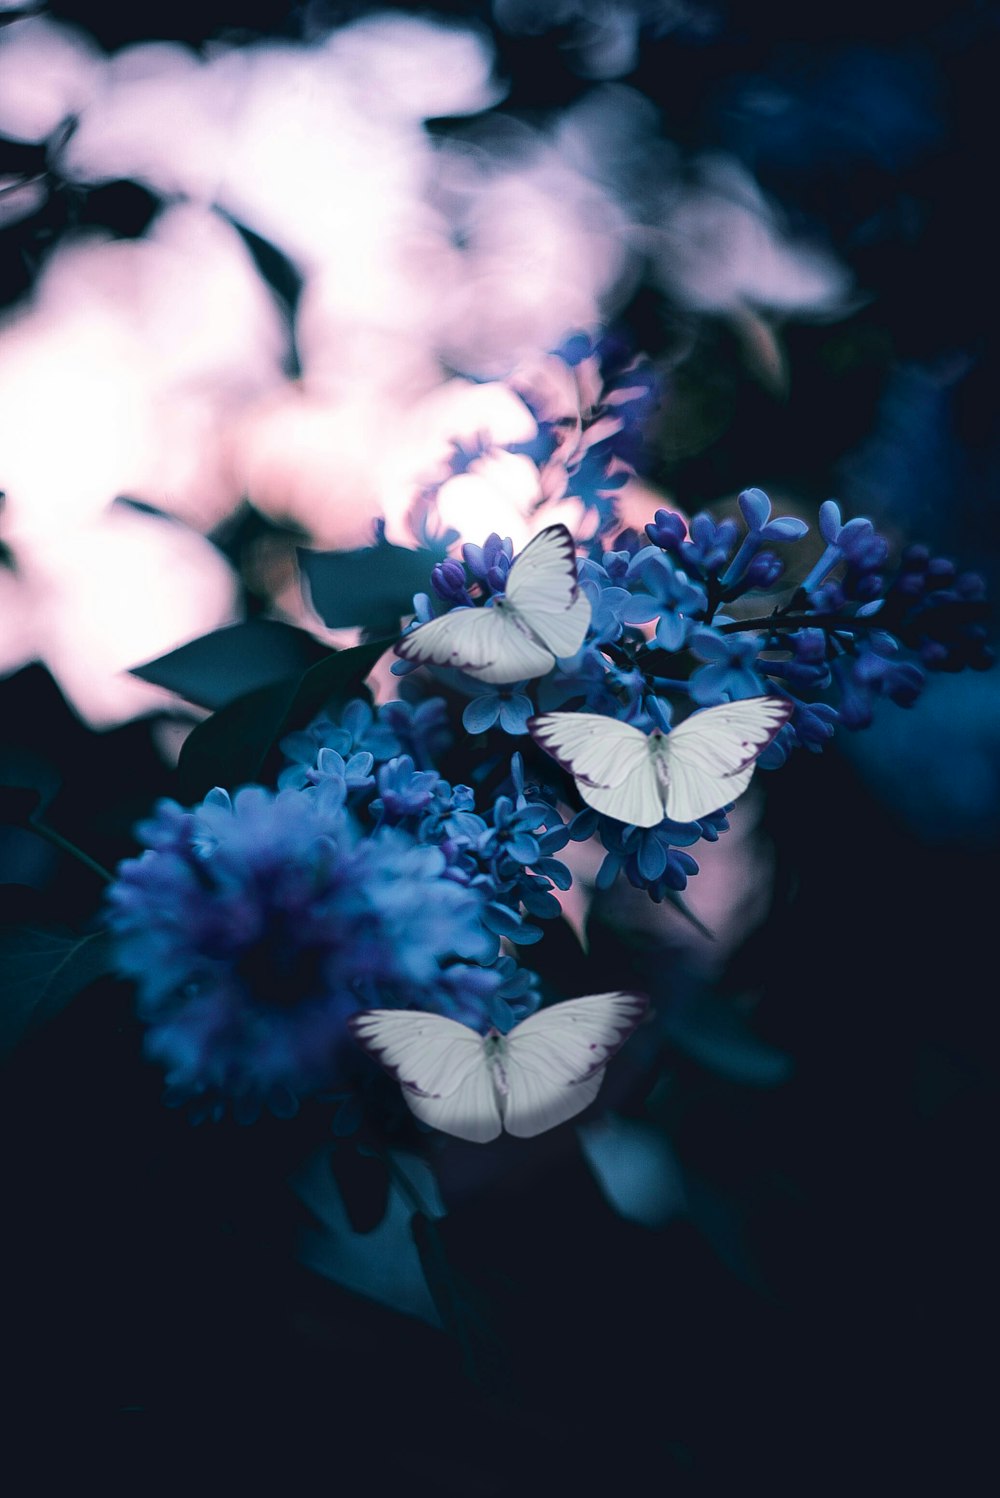 Blue Butterfly Pictures Download Free Images On Unsplash